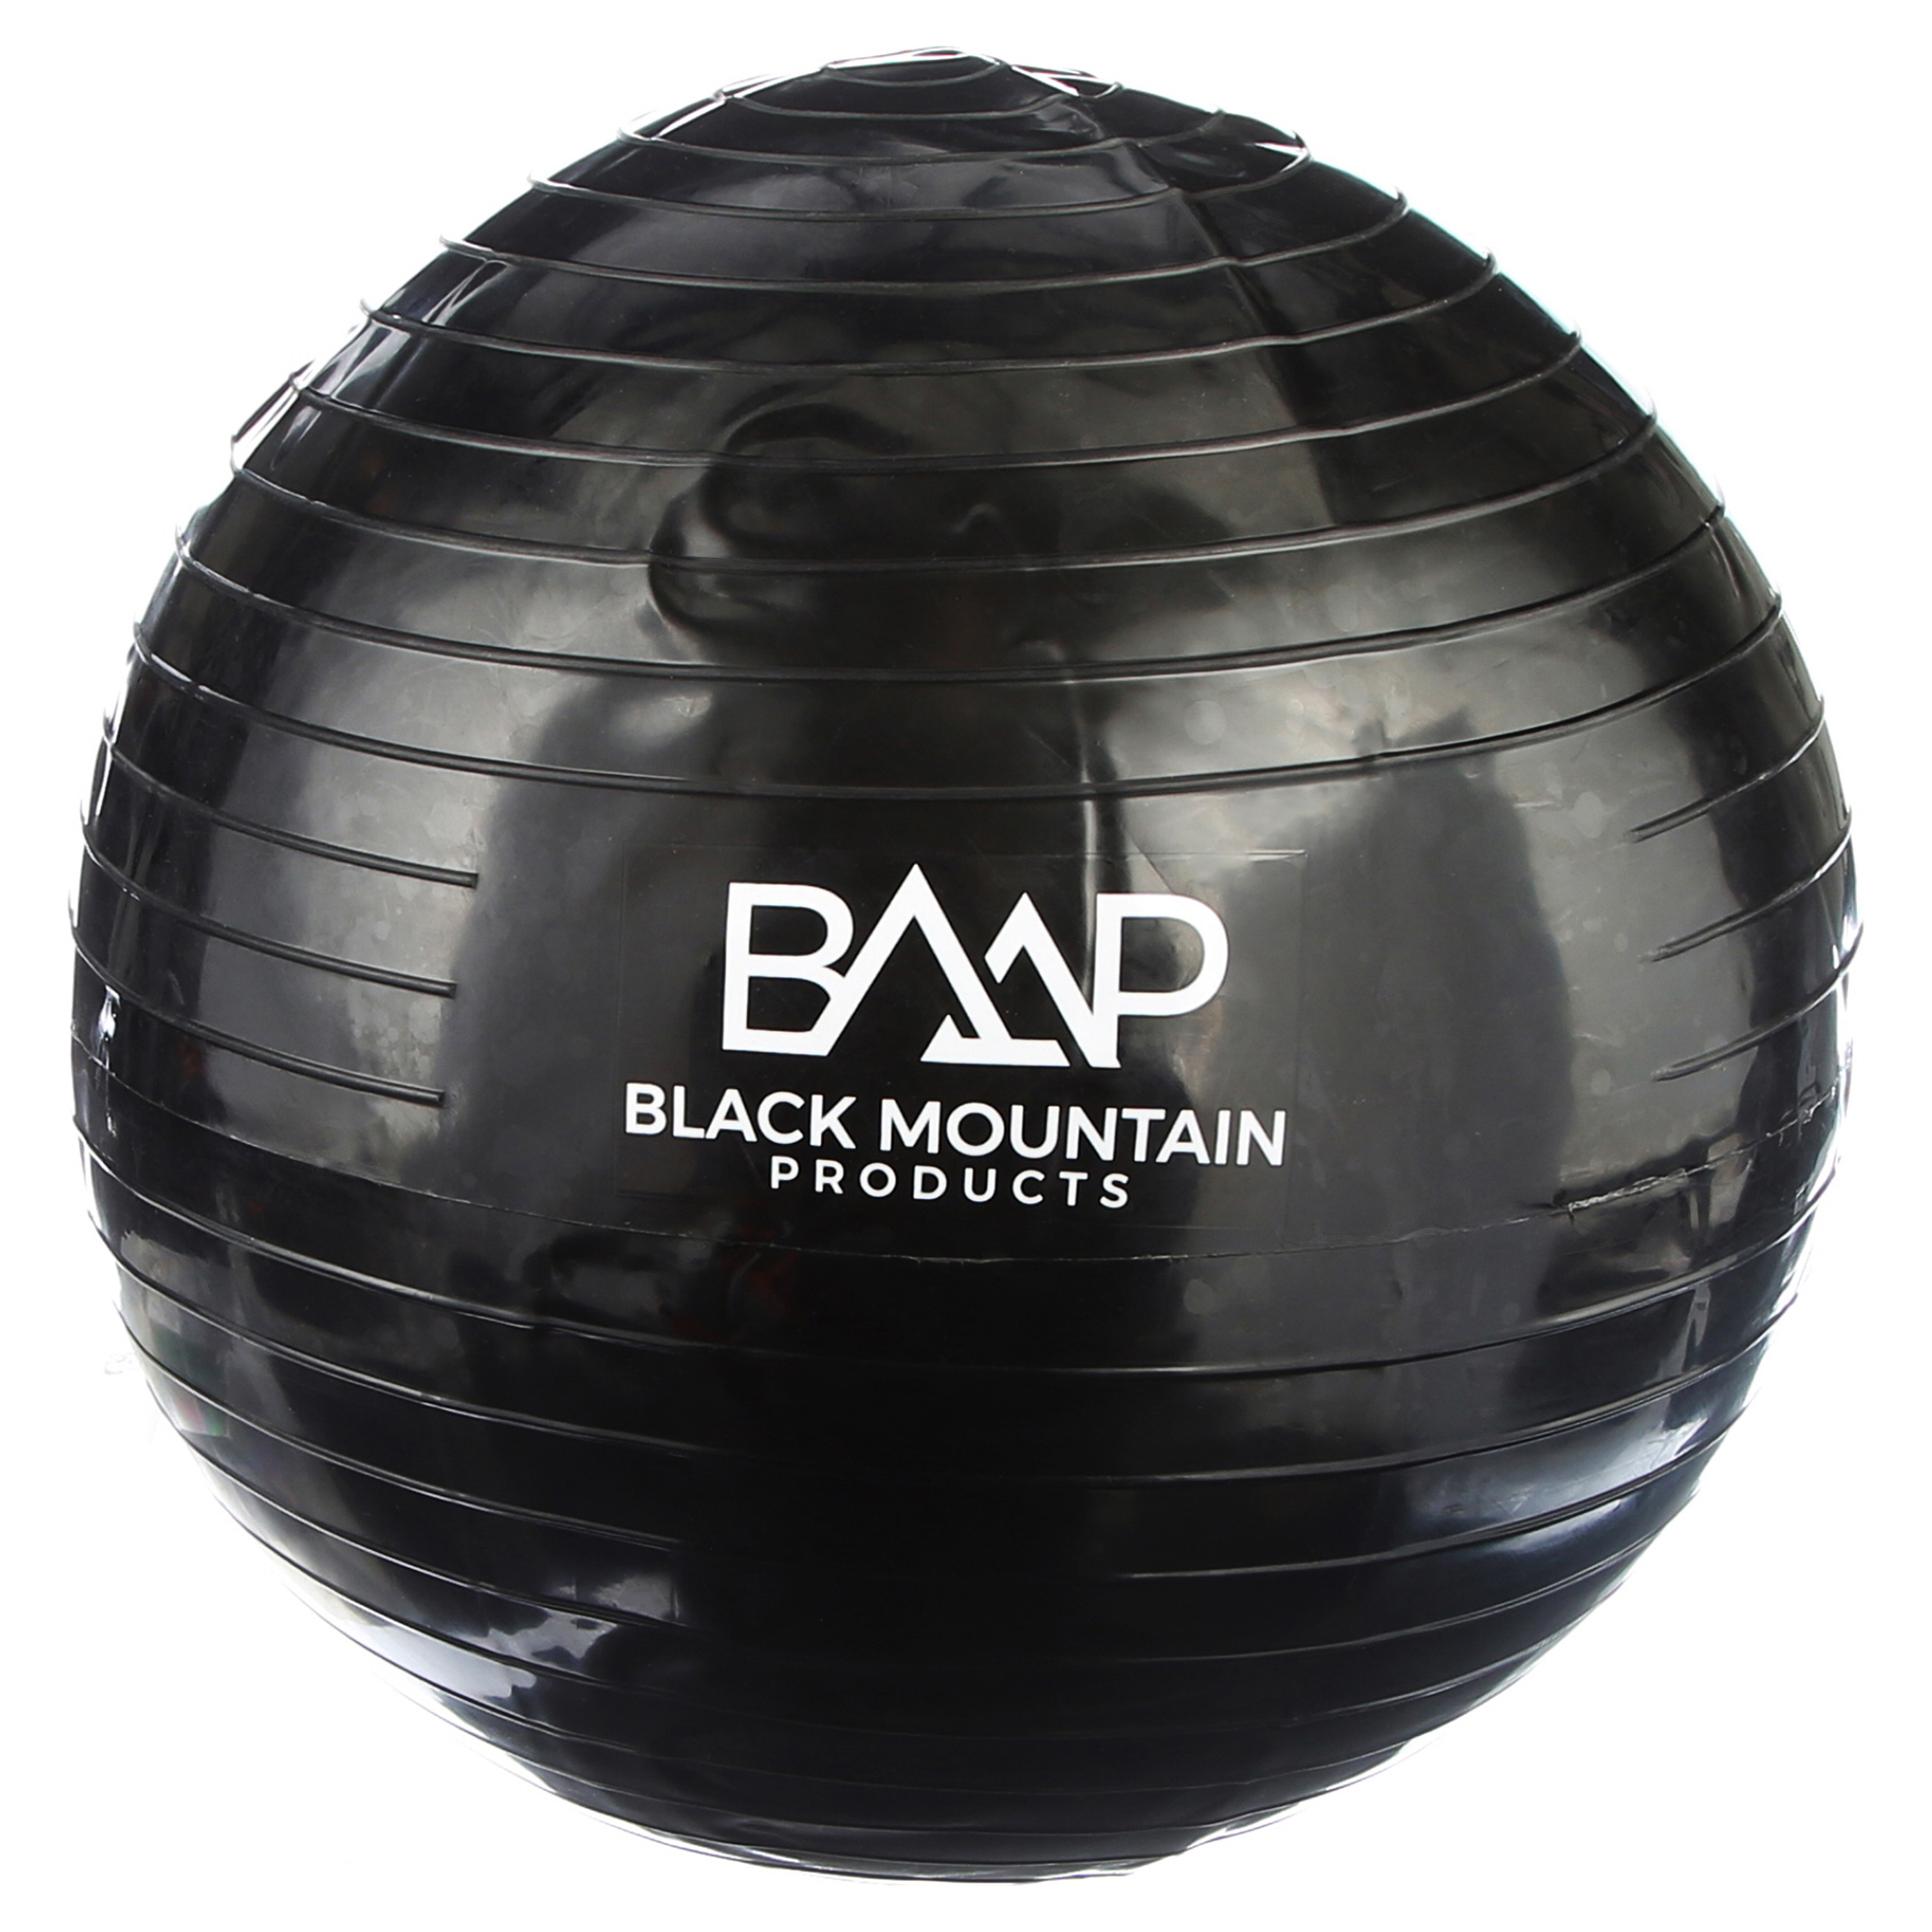 Black Mountain Products 2000 Lbs. Static Strength Exercise Stability Ball with Pump, 45 cm Black - image 5 of 7